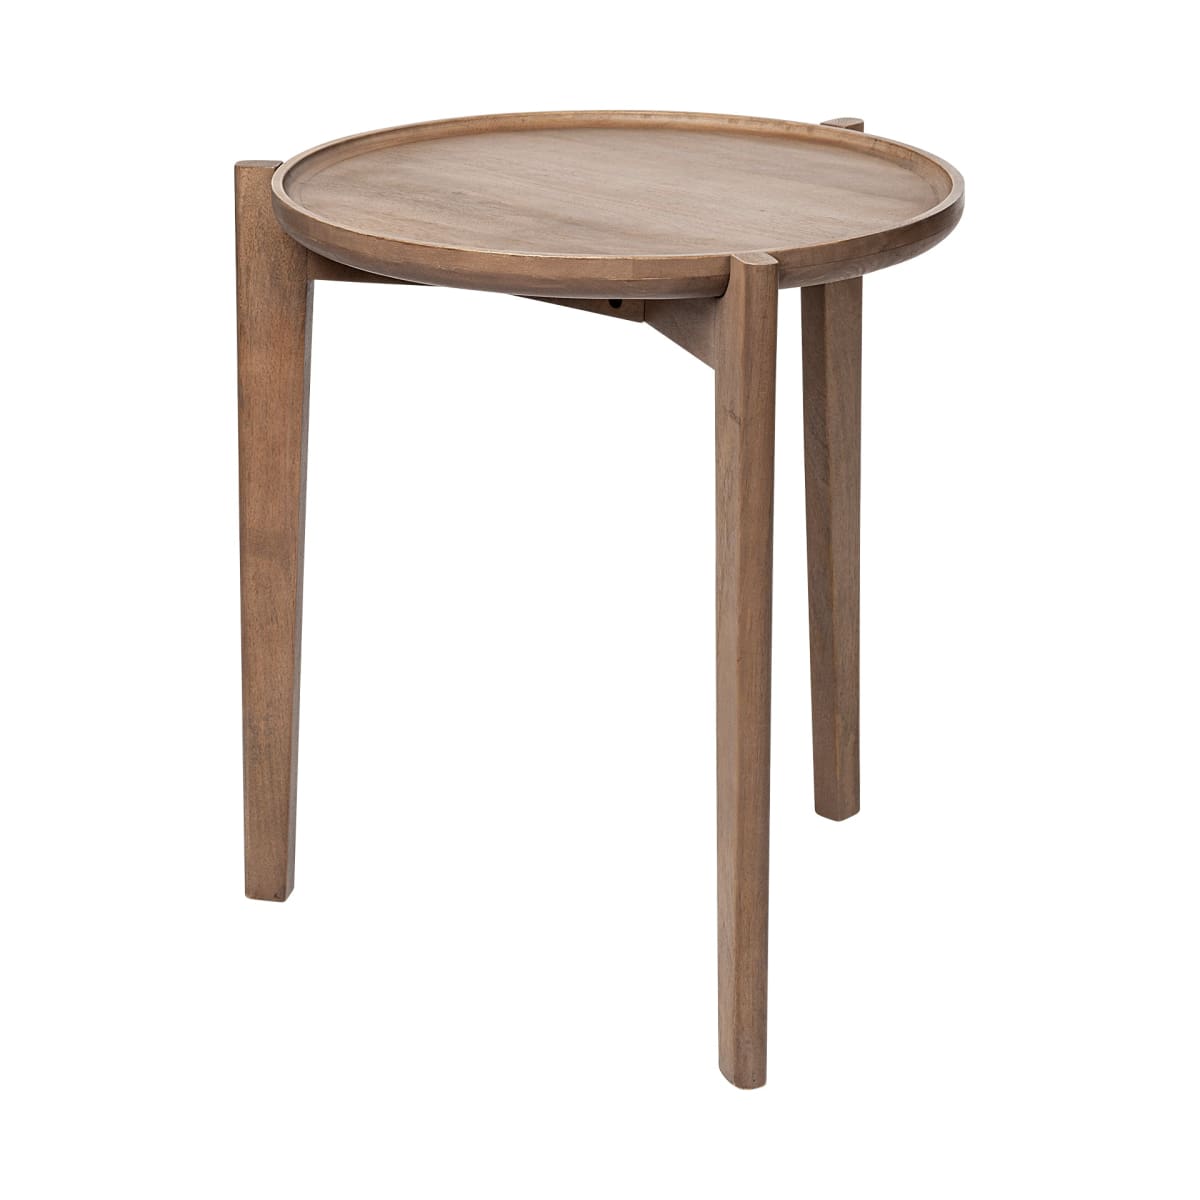 Cleaver Accent Table Brown Wood - accent-tables